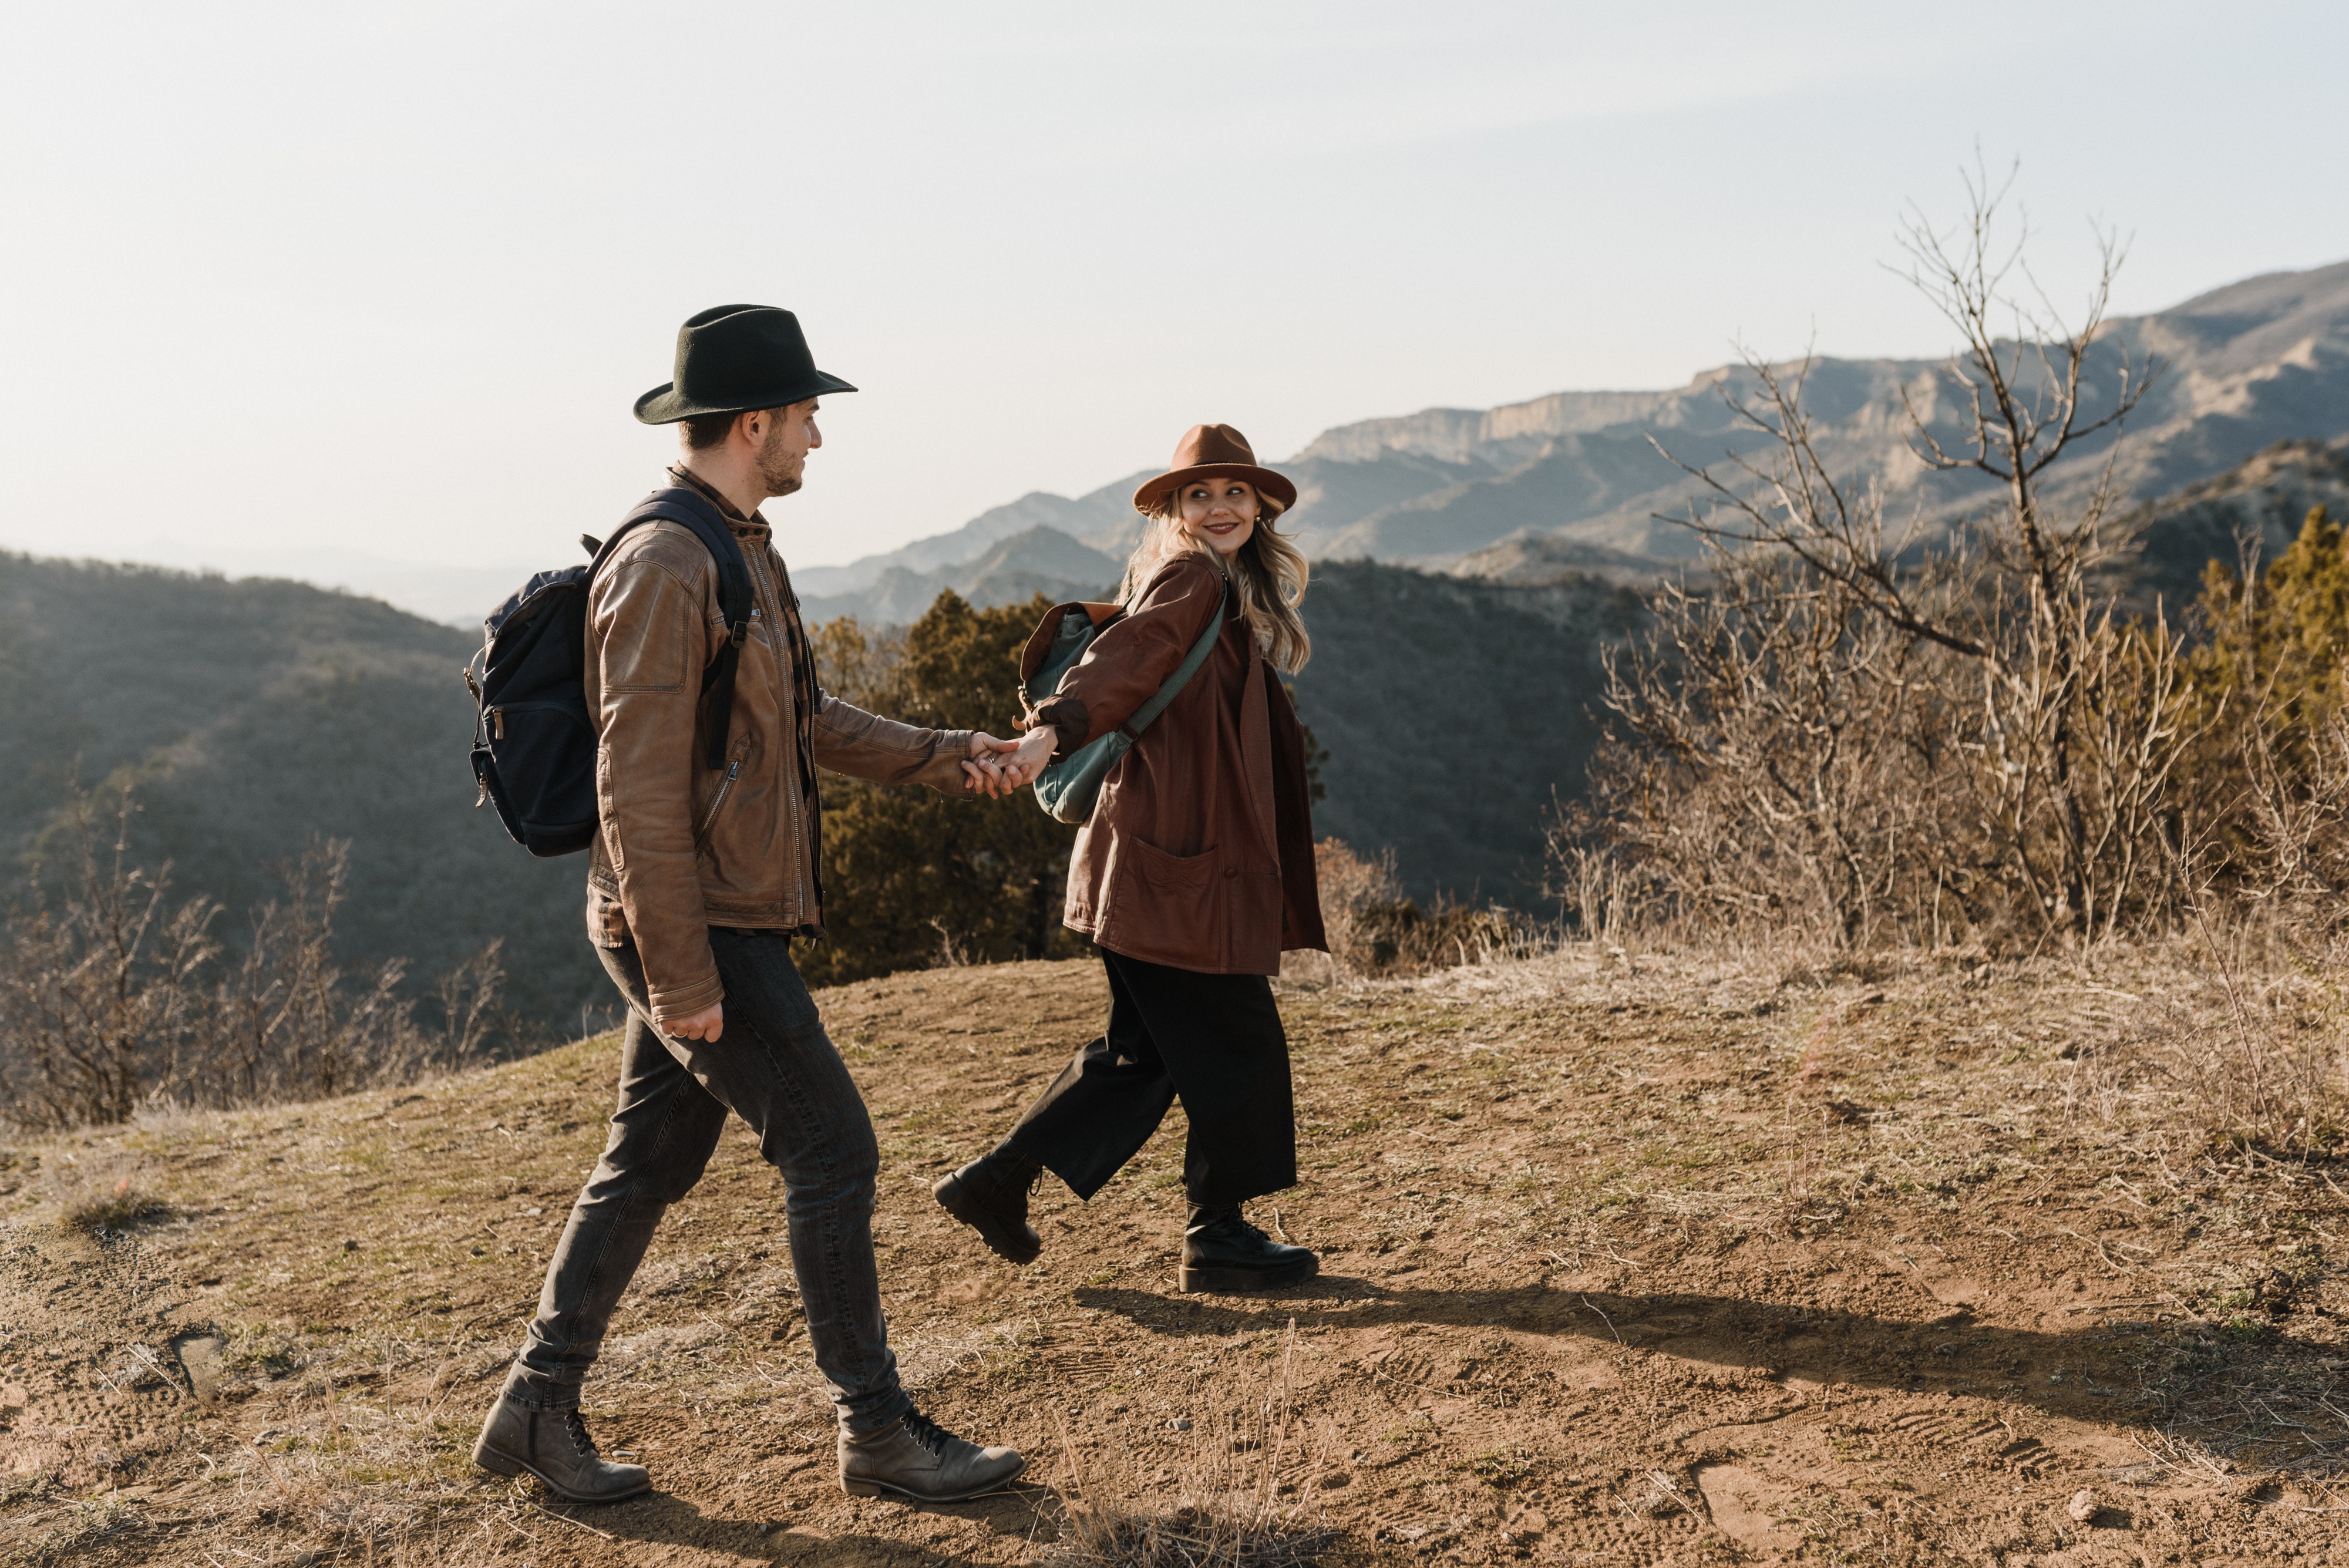 A woman lovingly looks at her partner as they stroll outdoors. | Source: Pexels